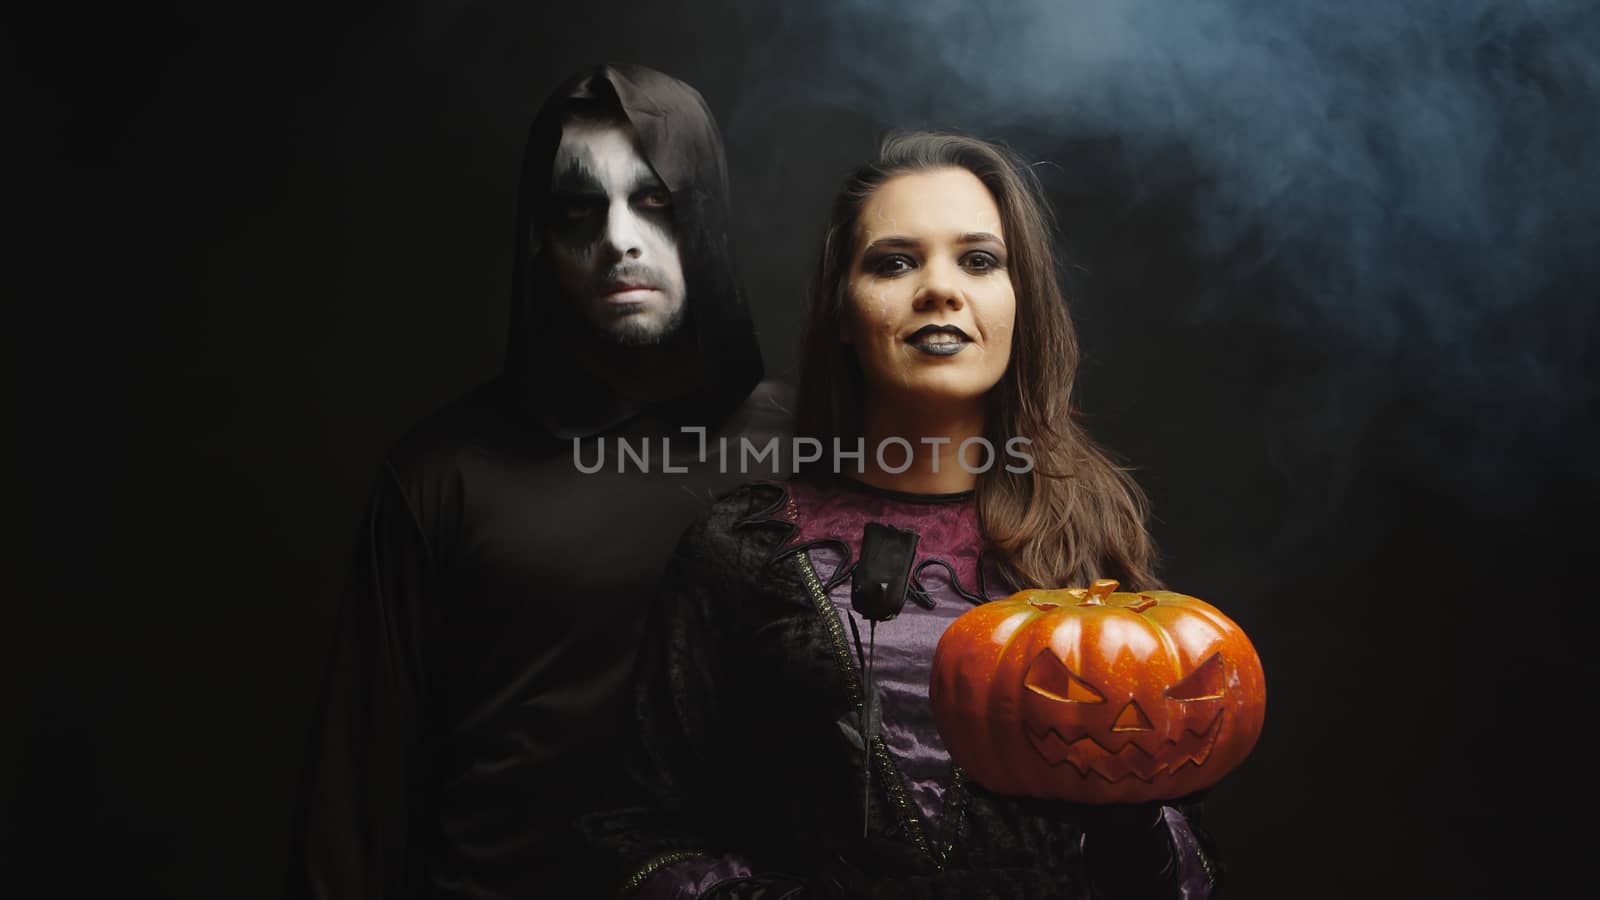 Young woman dressed up like a witch holding a Jack o Lantern for Hallowee next to a dark grim reaper over a black background